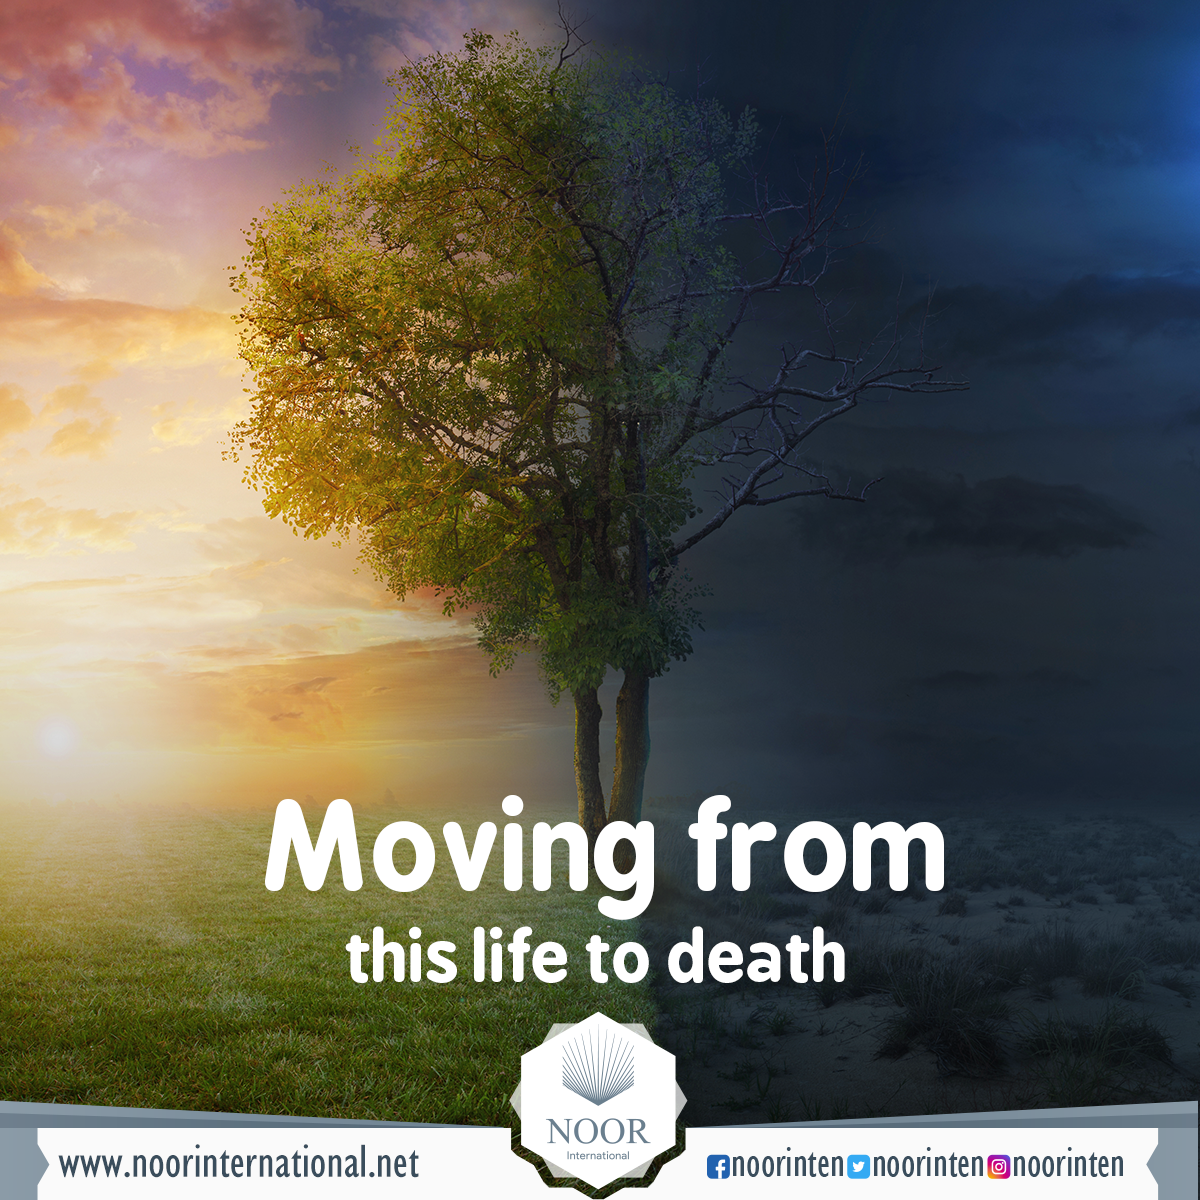 Moving from this life to death